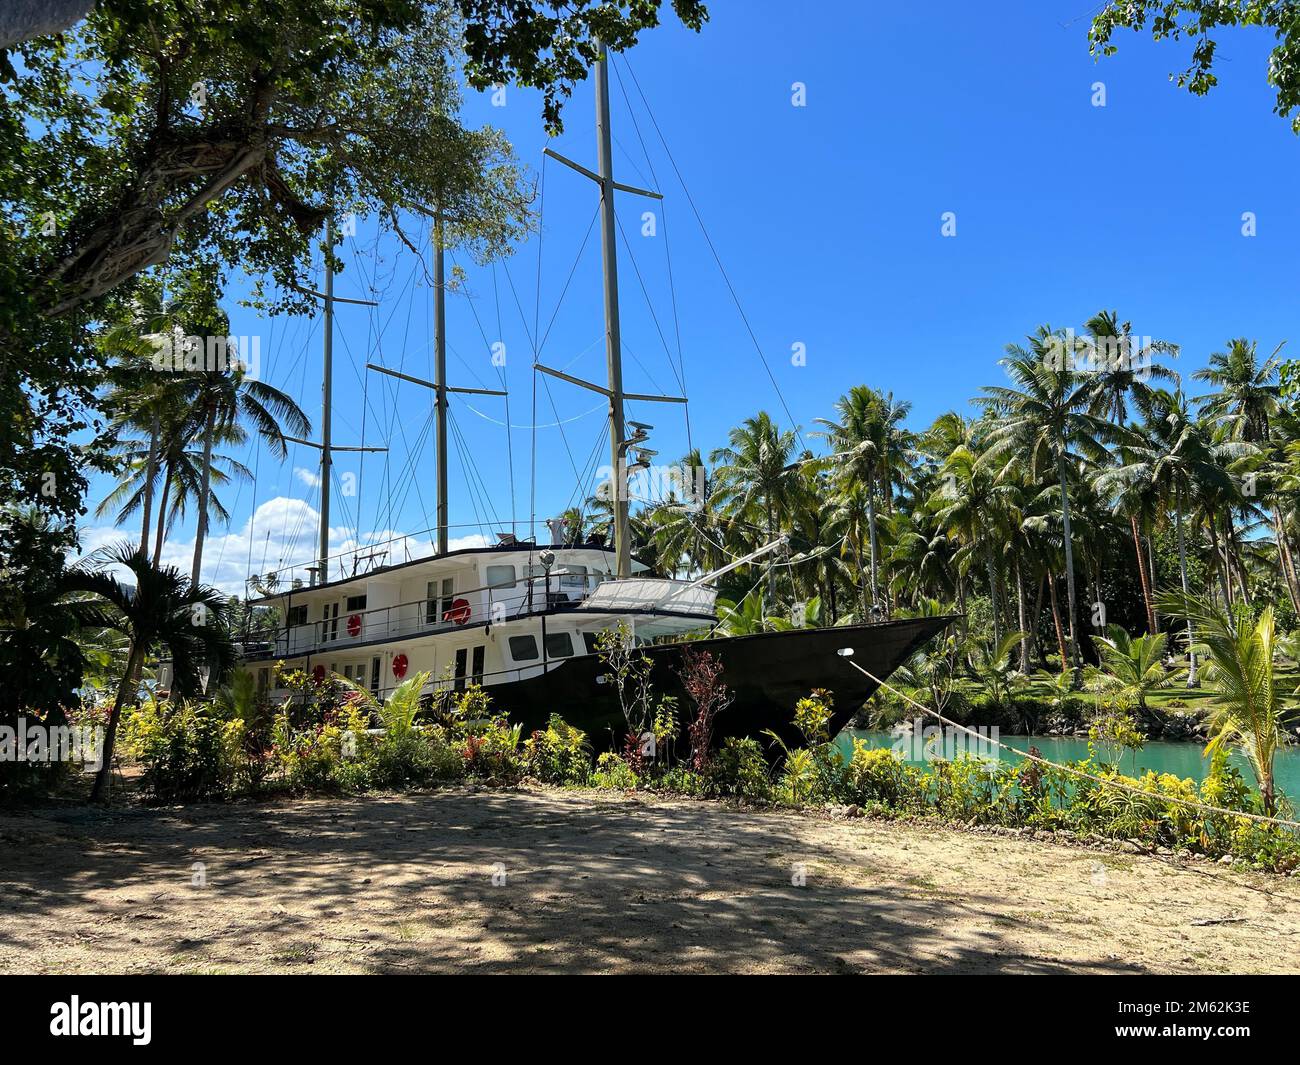 Sailing ship hidden in the jungle of a tropical island Stock Photo